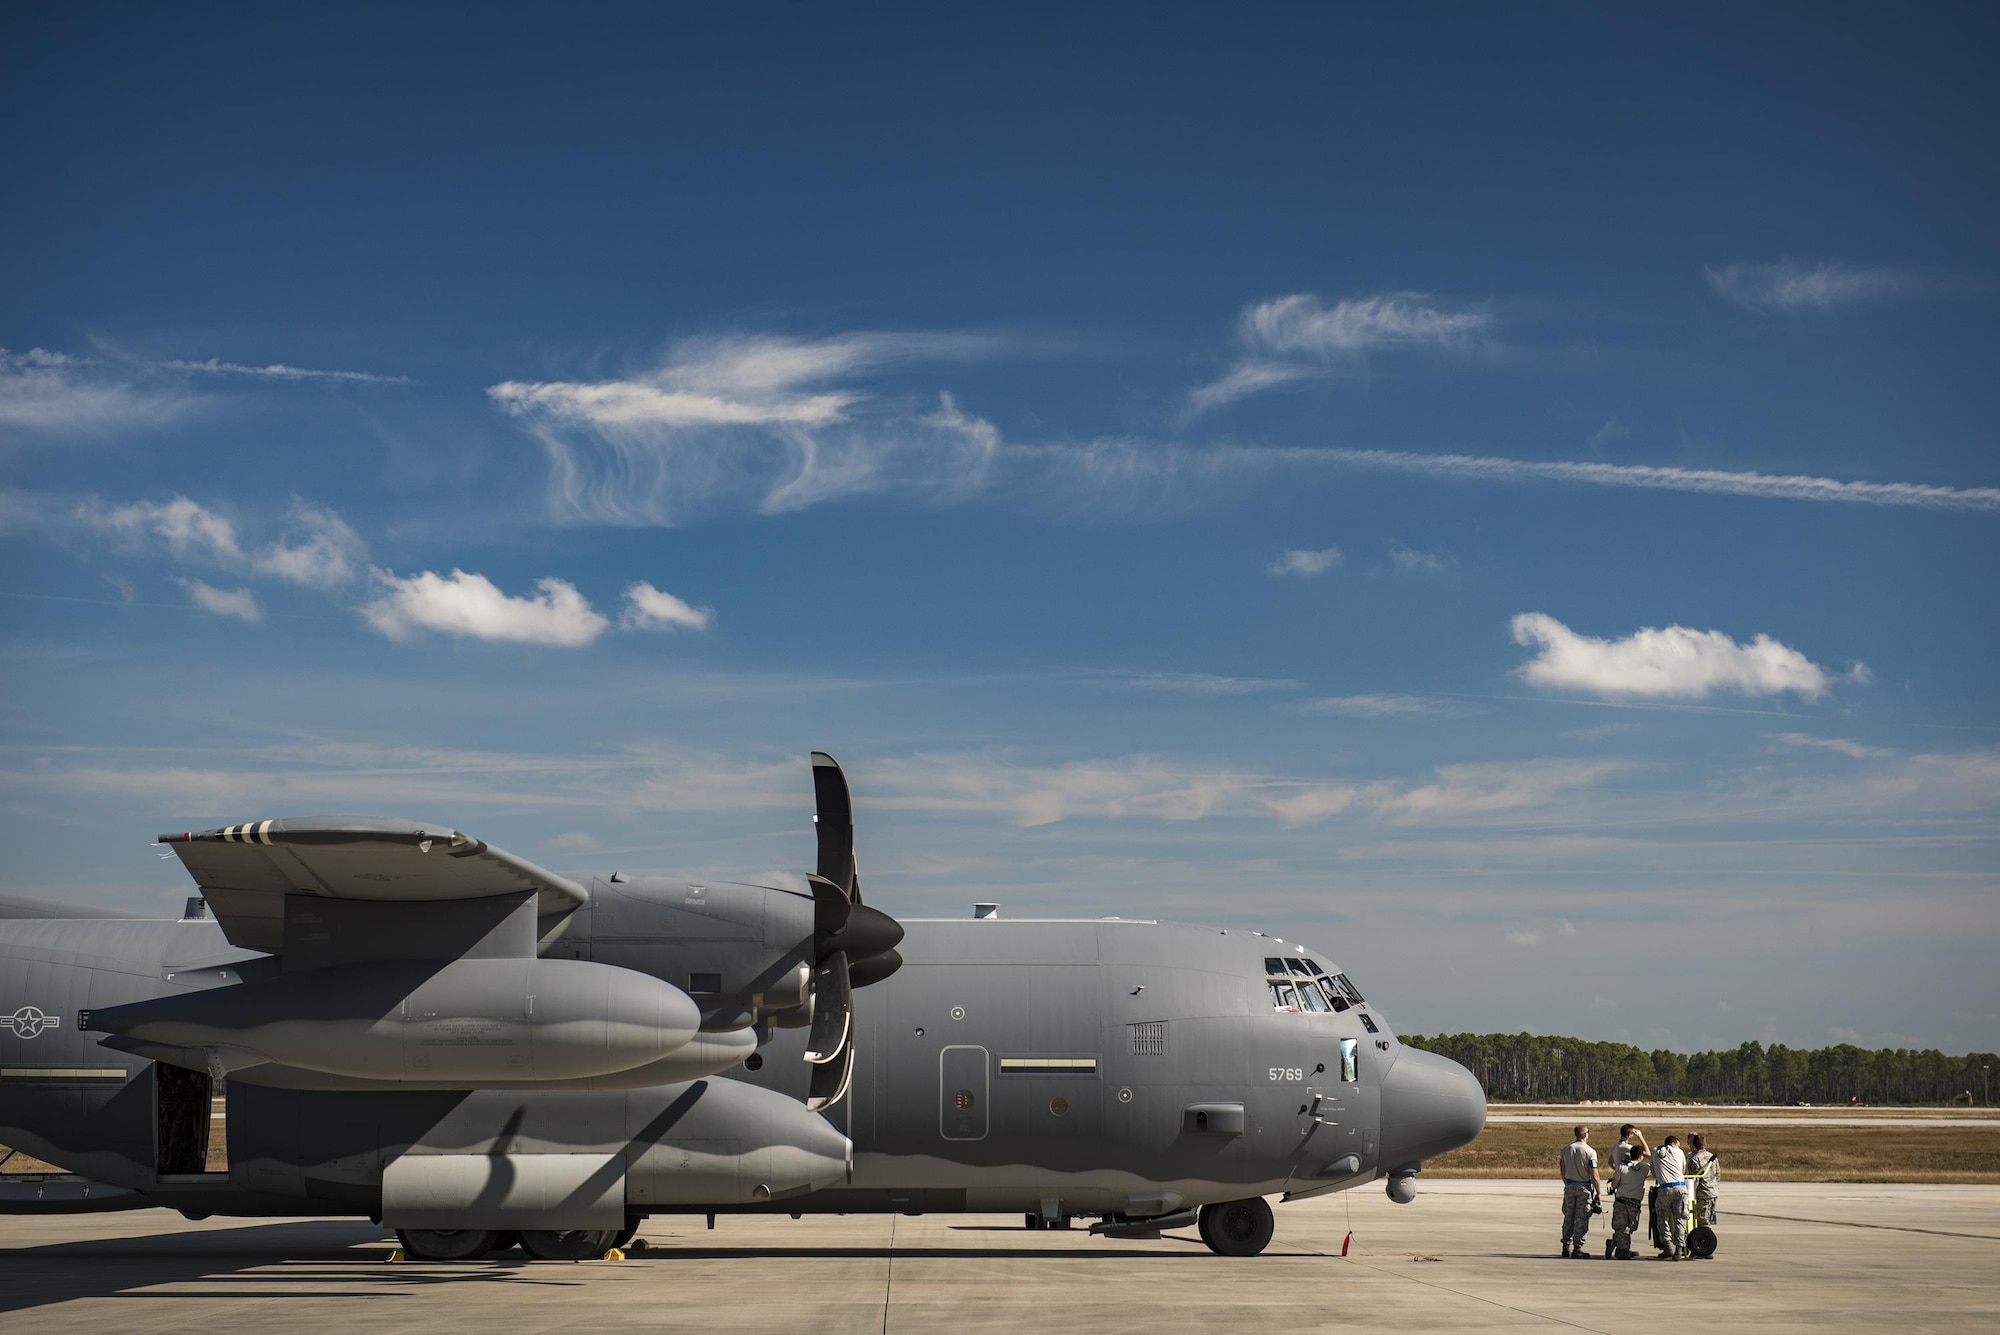 Airmen from the 71st Aircraft Maintenance Unit wait in front of an HC-130J Combat King II for a mission to kick-off during a rapid-rescue exercise, Nov. 2, 2016, at Tyndall Air Force Base, Fla. The exercise was designed to test the 347th Rescue Group’s ability to rapidly deploy, plan and execute rescue operations in combat environments. The exercise included HC-130J Combat King IIs, HH-60G Pave Hawks, C-17 Globemaster IIIs, A-10C Thunderbolt IIs, E-8C Joint Stars, pararescuemen and maintenance, intelligence and support personnel. (U.S. Air Force photo by Staff Sgt. Ryan Callaghan)
